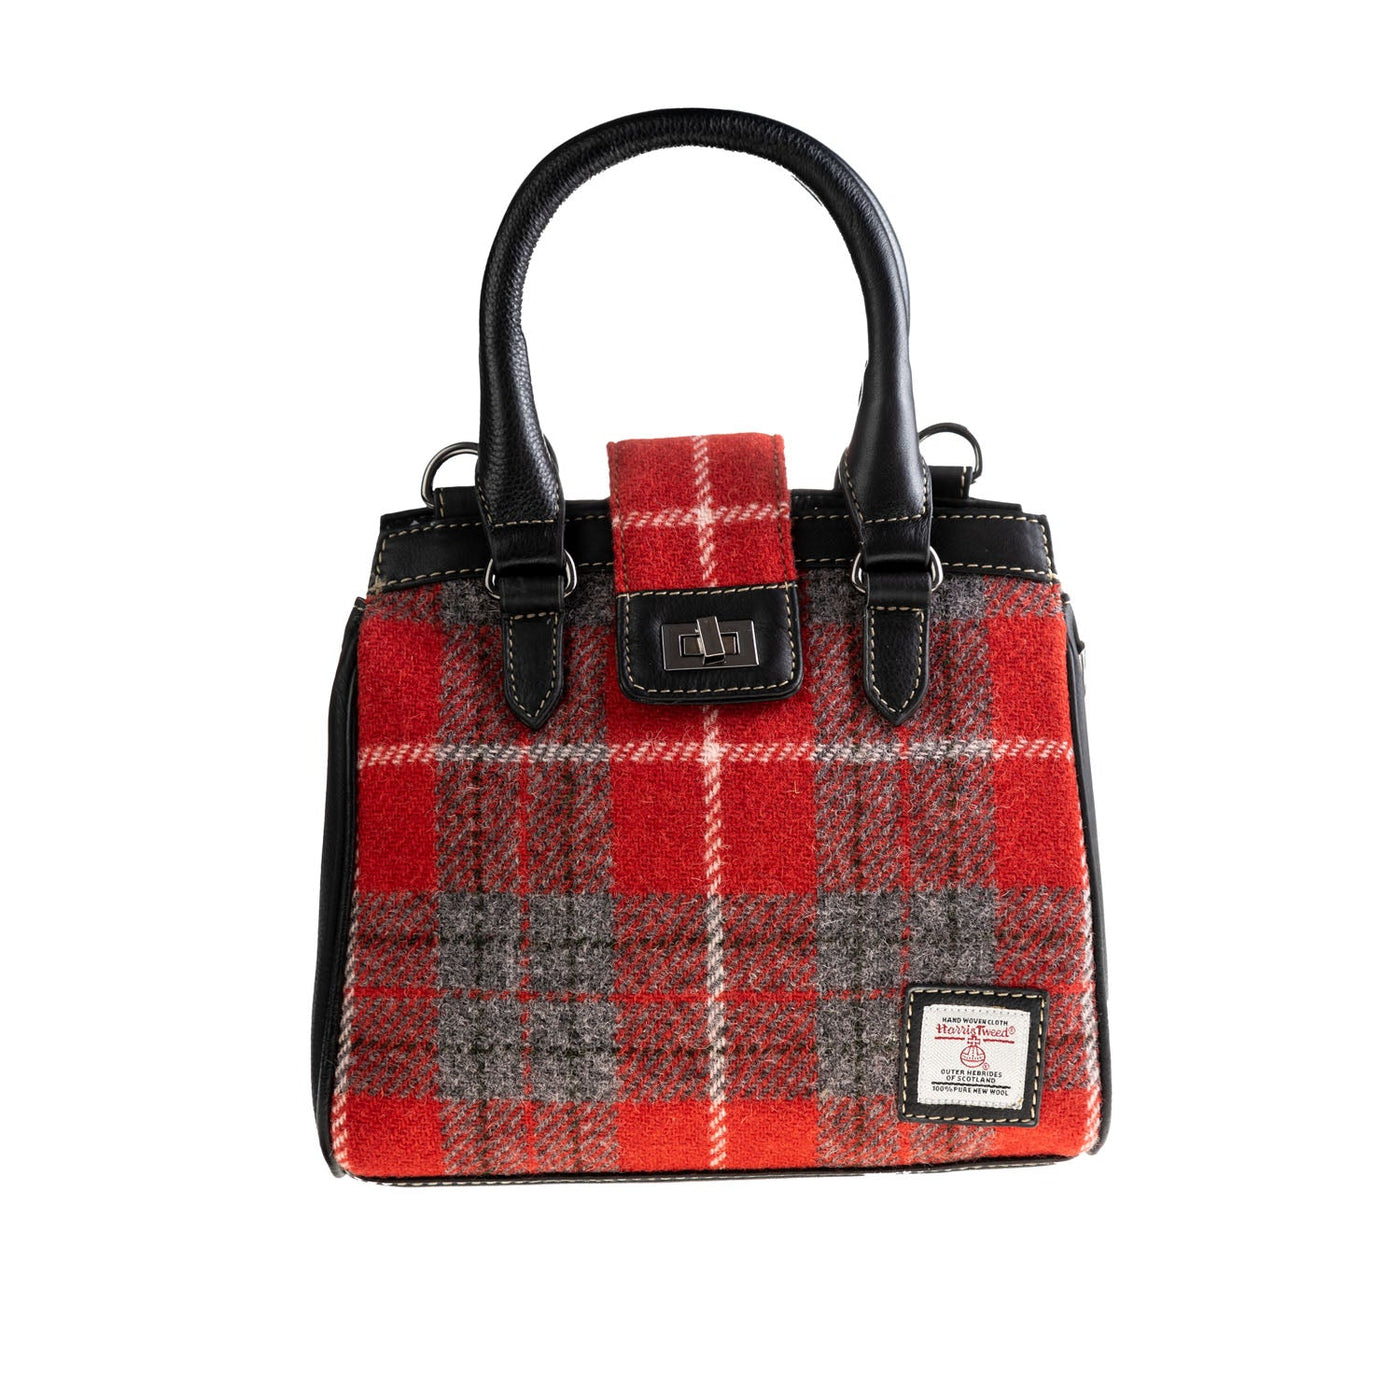 Ht Leather Hand Bag With Flap Closer Red Check / Black - Dunedin Cashmere